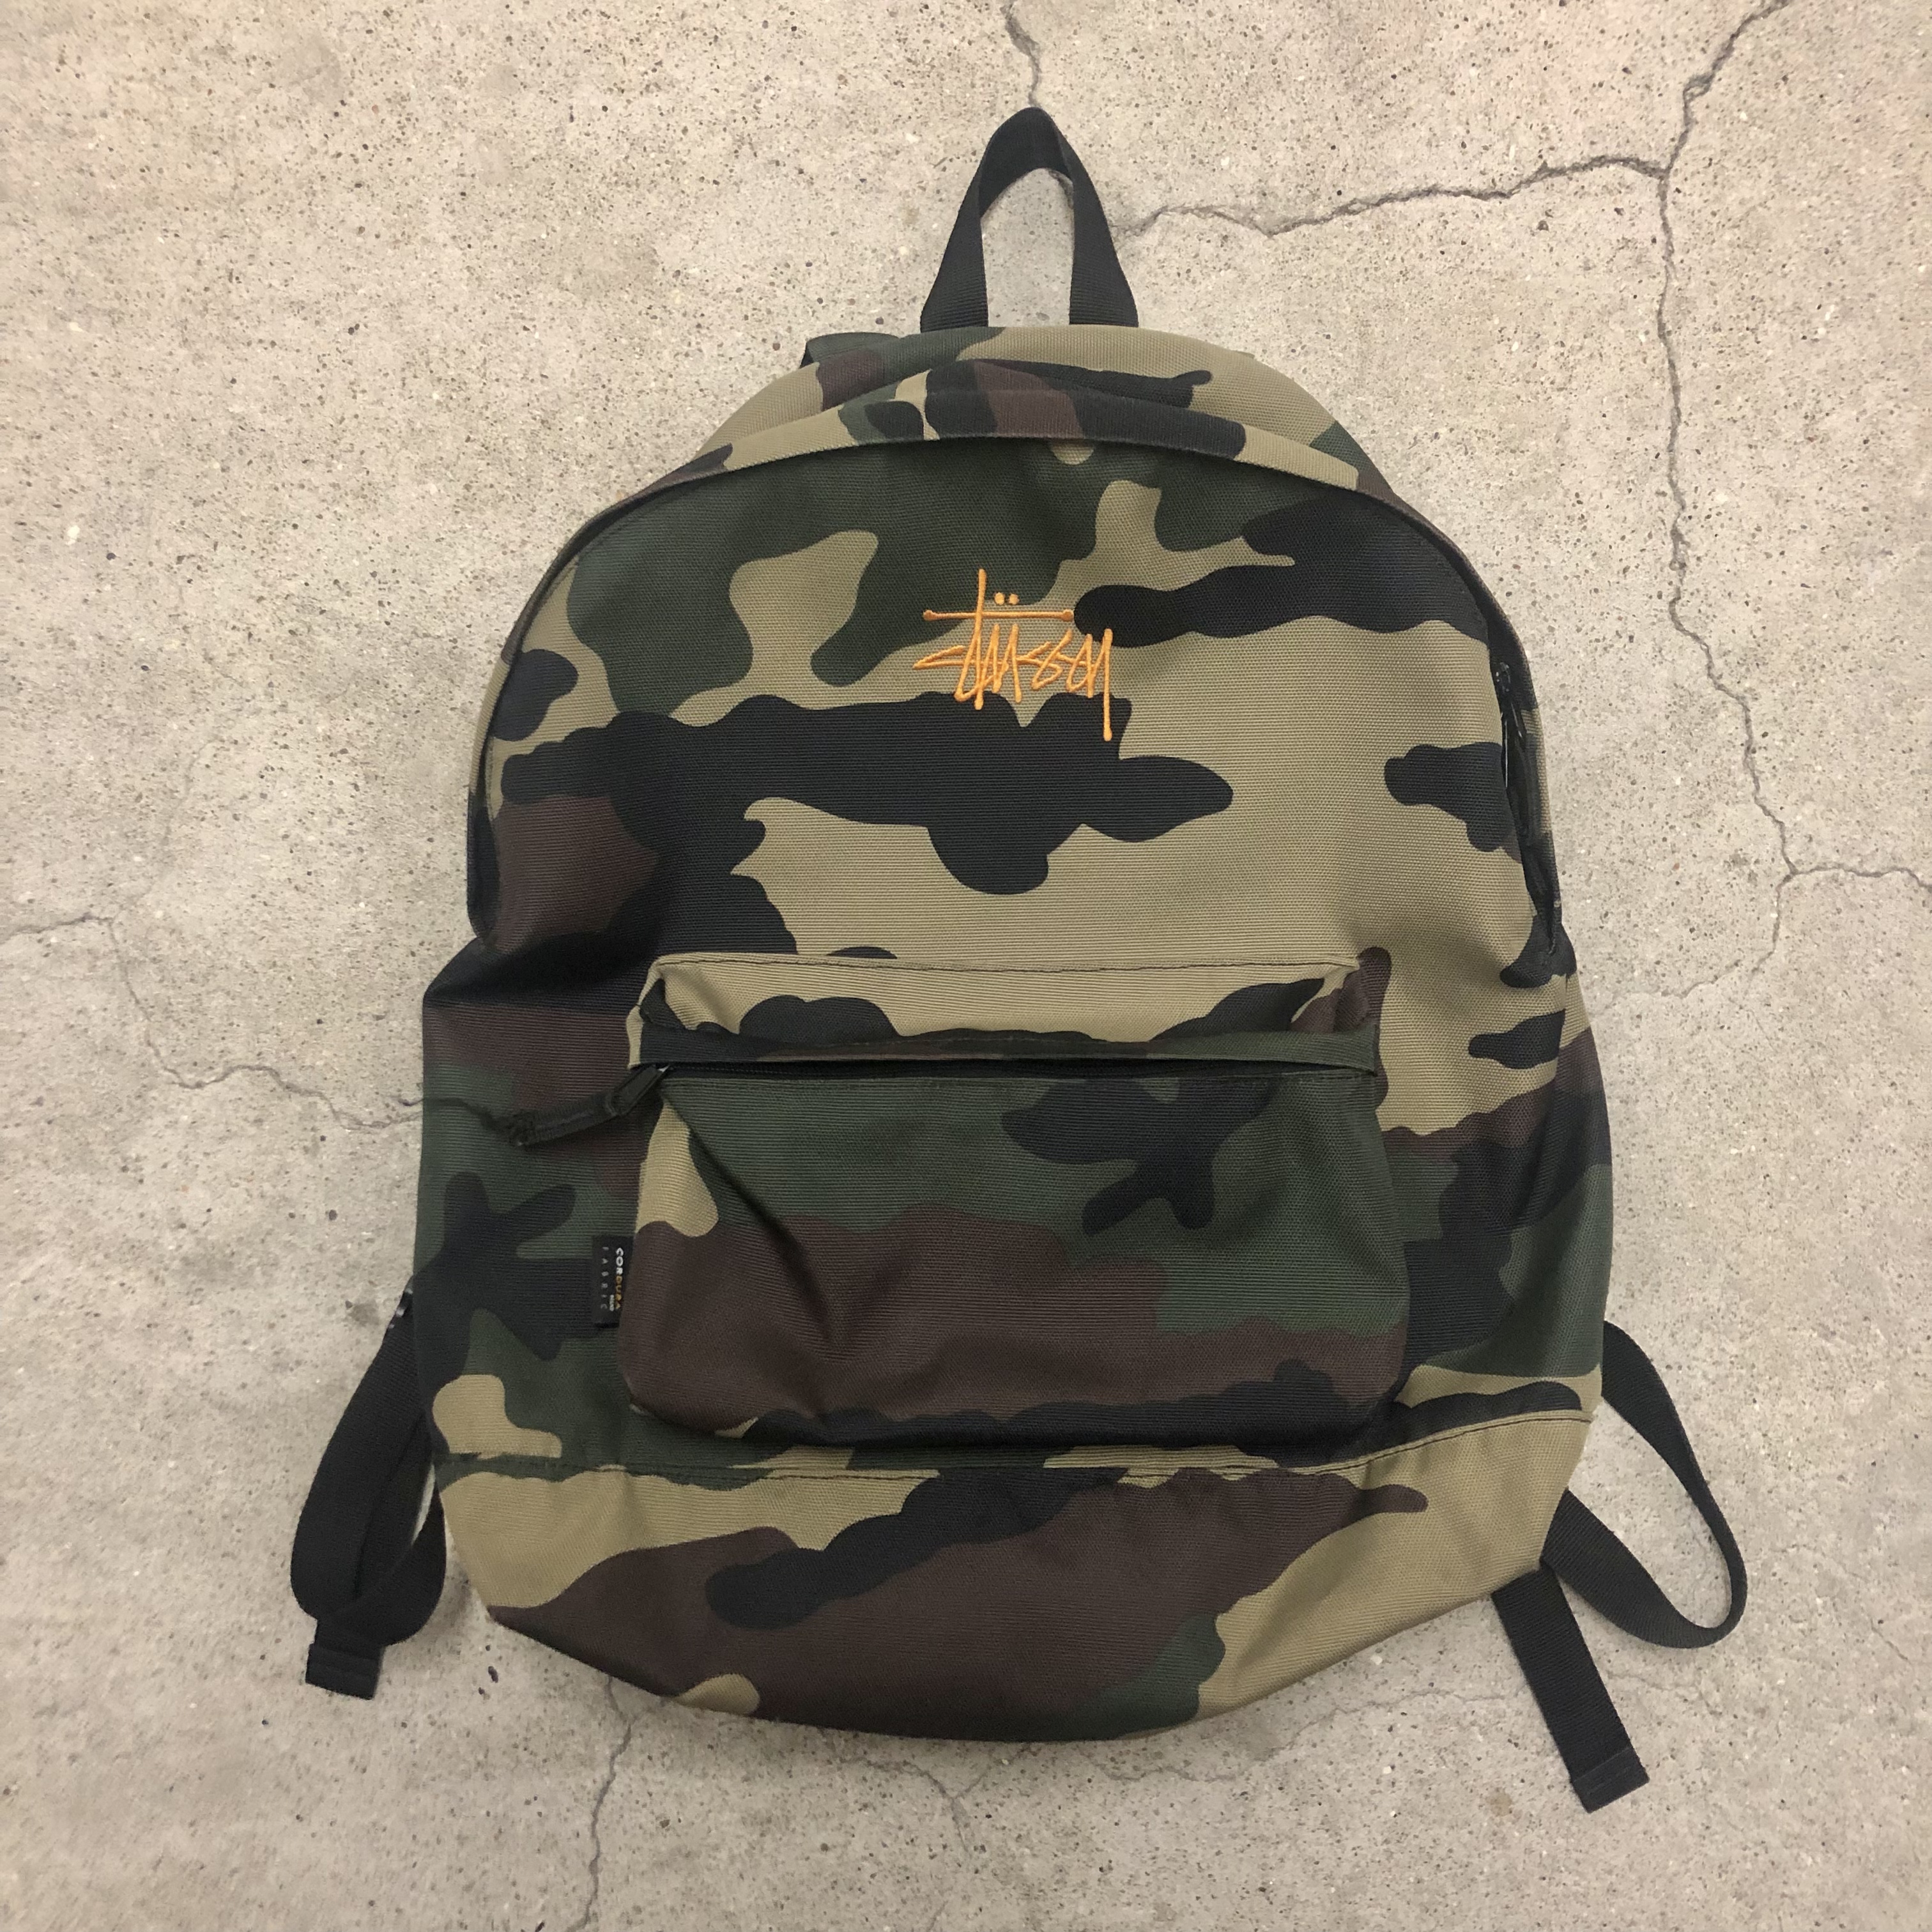 STUSSY/Camouflage Backpack/バックパック/カモフラ/リュック/カーキ 